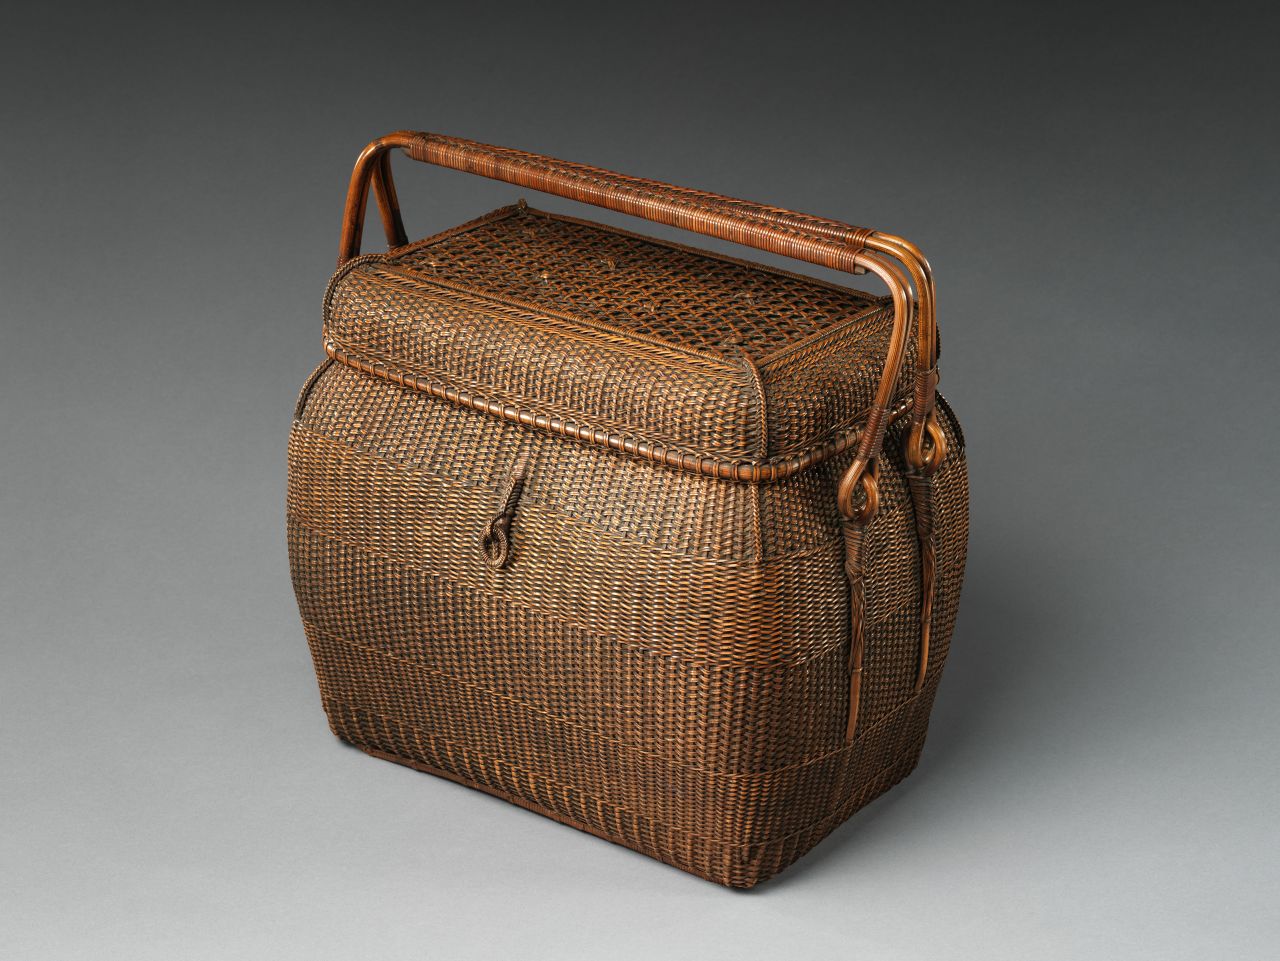 A basket dating back to the latter half of the 19th century, a time when bamboo weaving was beginning to be seen as an art in its own right.